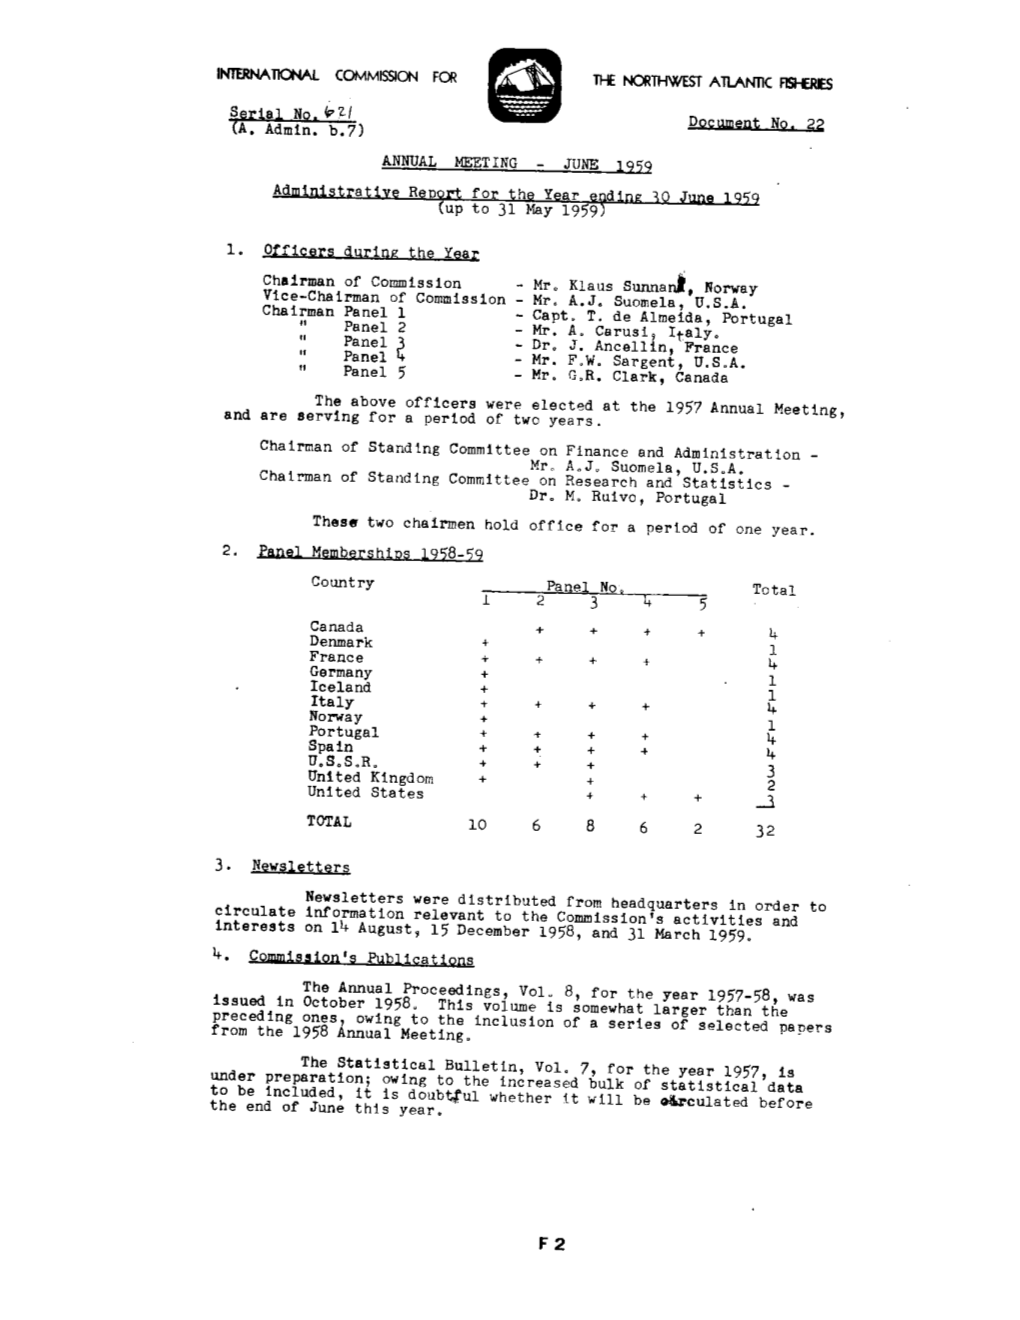 Administrative Report for the Year Ending 30 June 1959